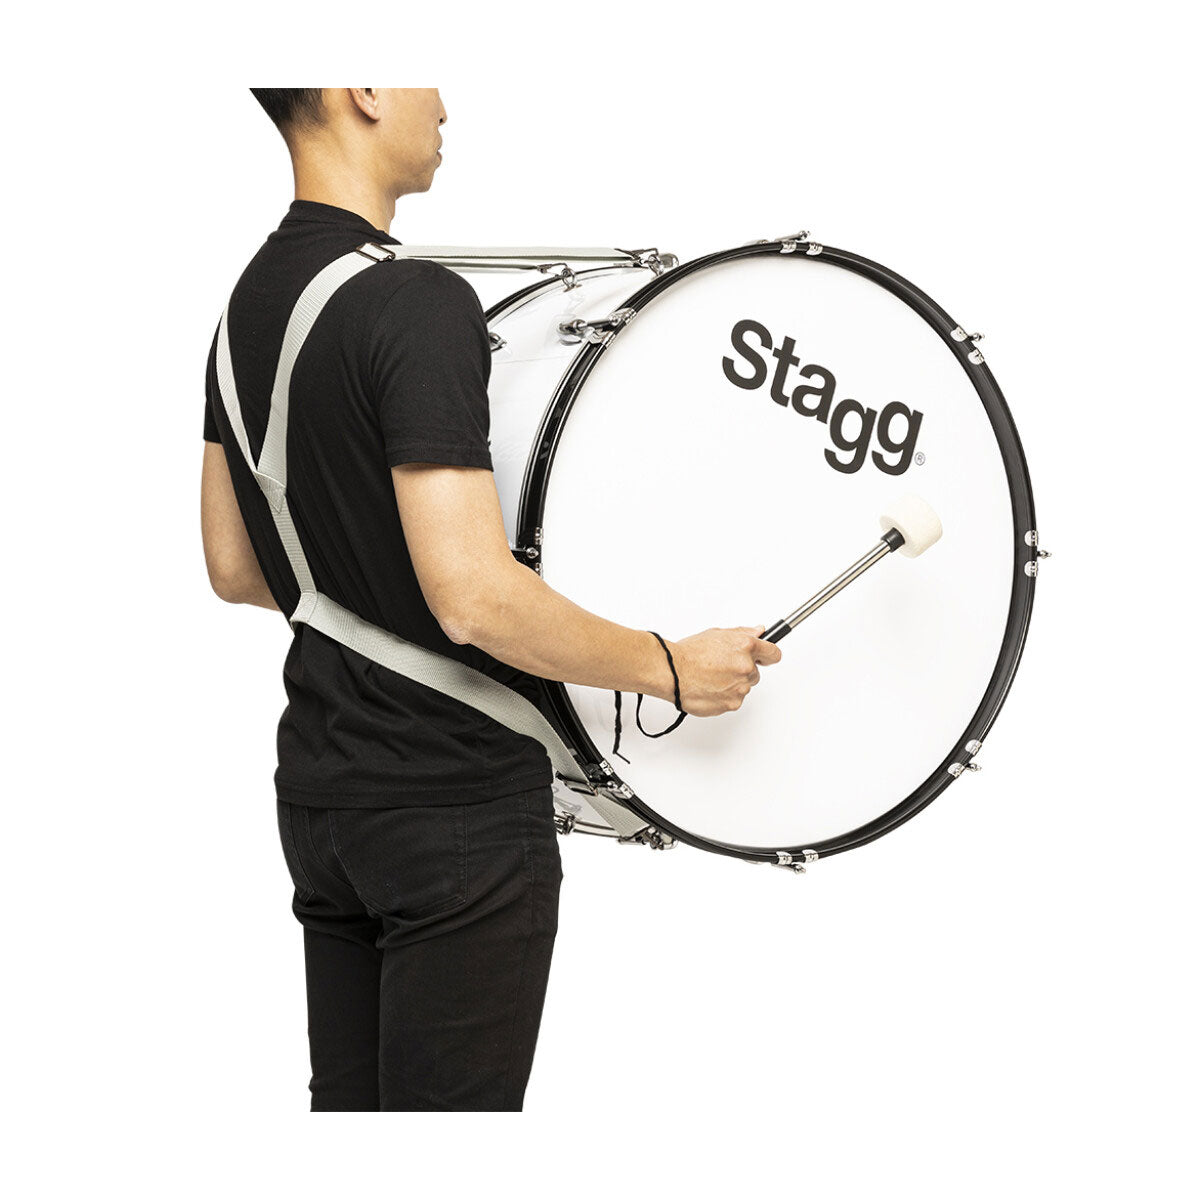 Stagg Marching Bass Drum 26" x 12" Incl Beater